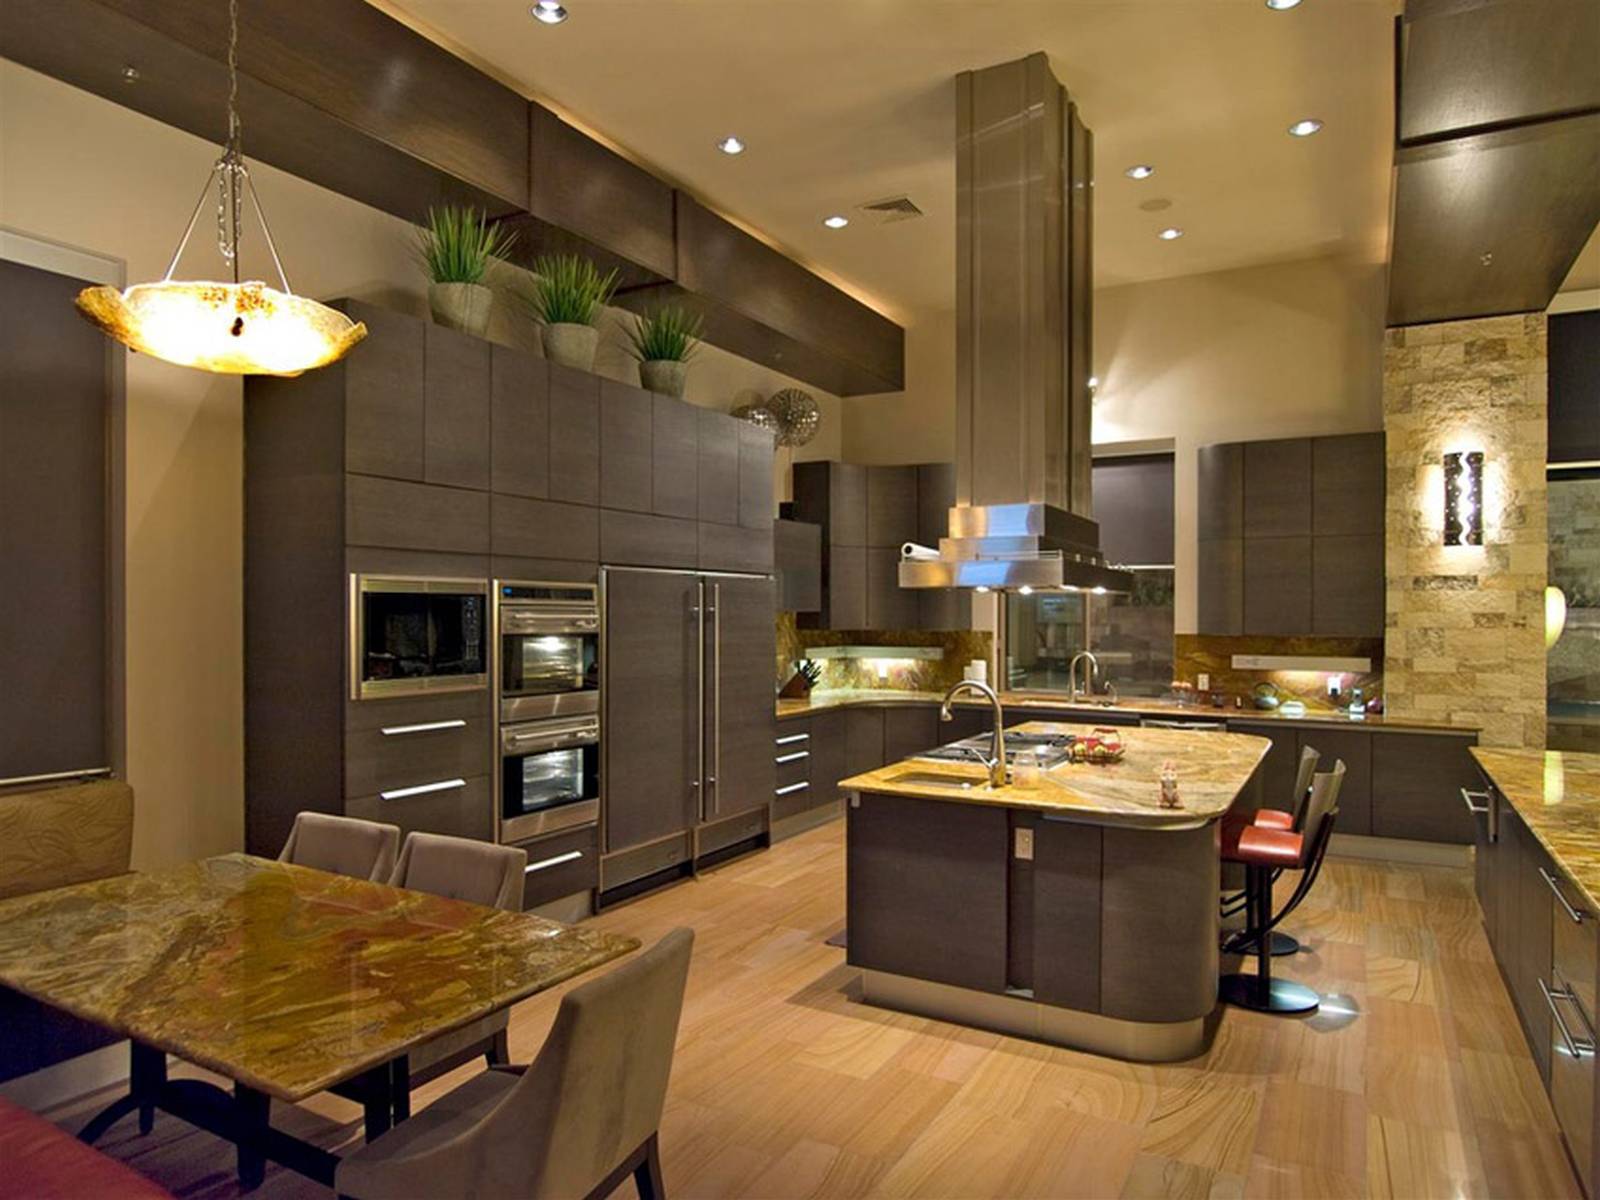 Contemporary Kitchen With High Ceilings Light Wood Floors And